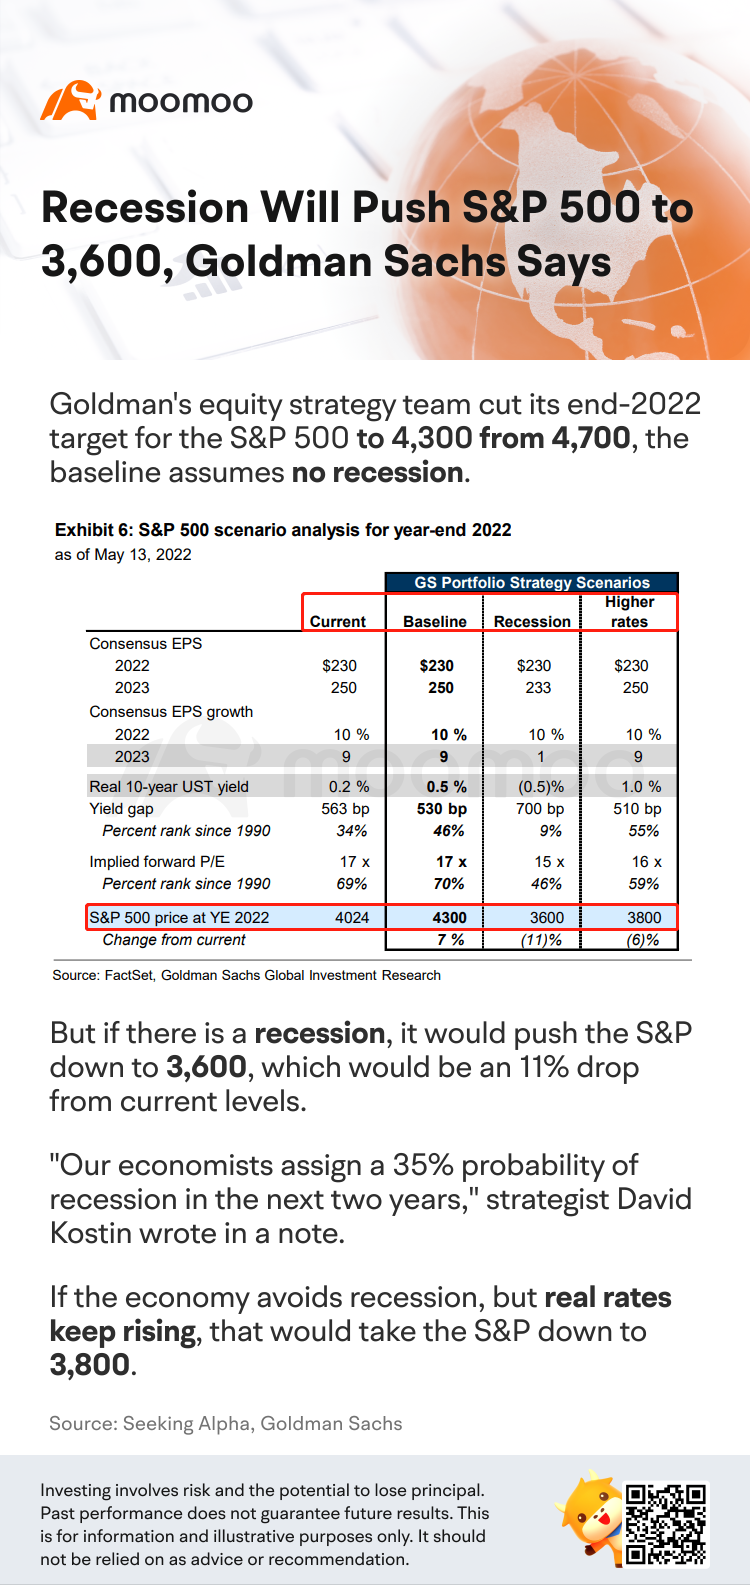 Recession will push S&P 500 to 3,600, Goldman Sachs says